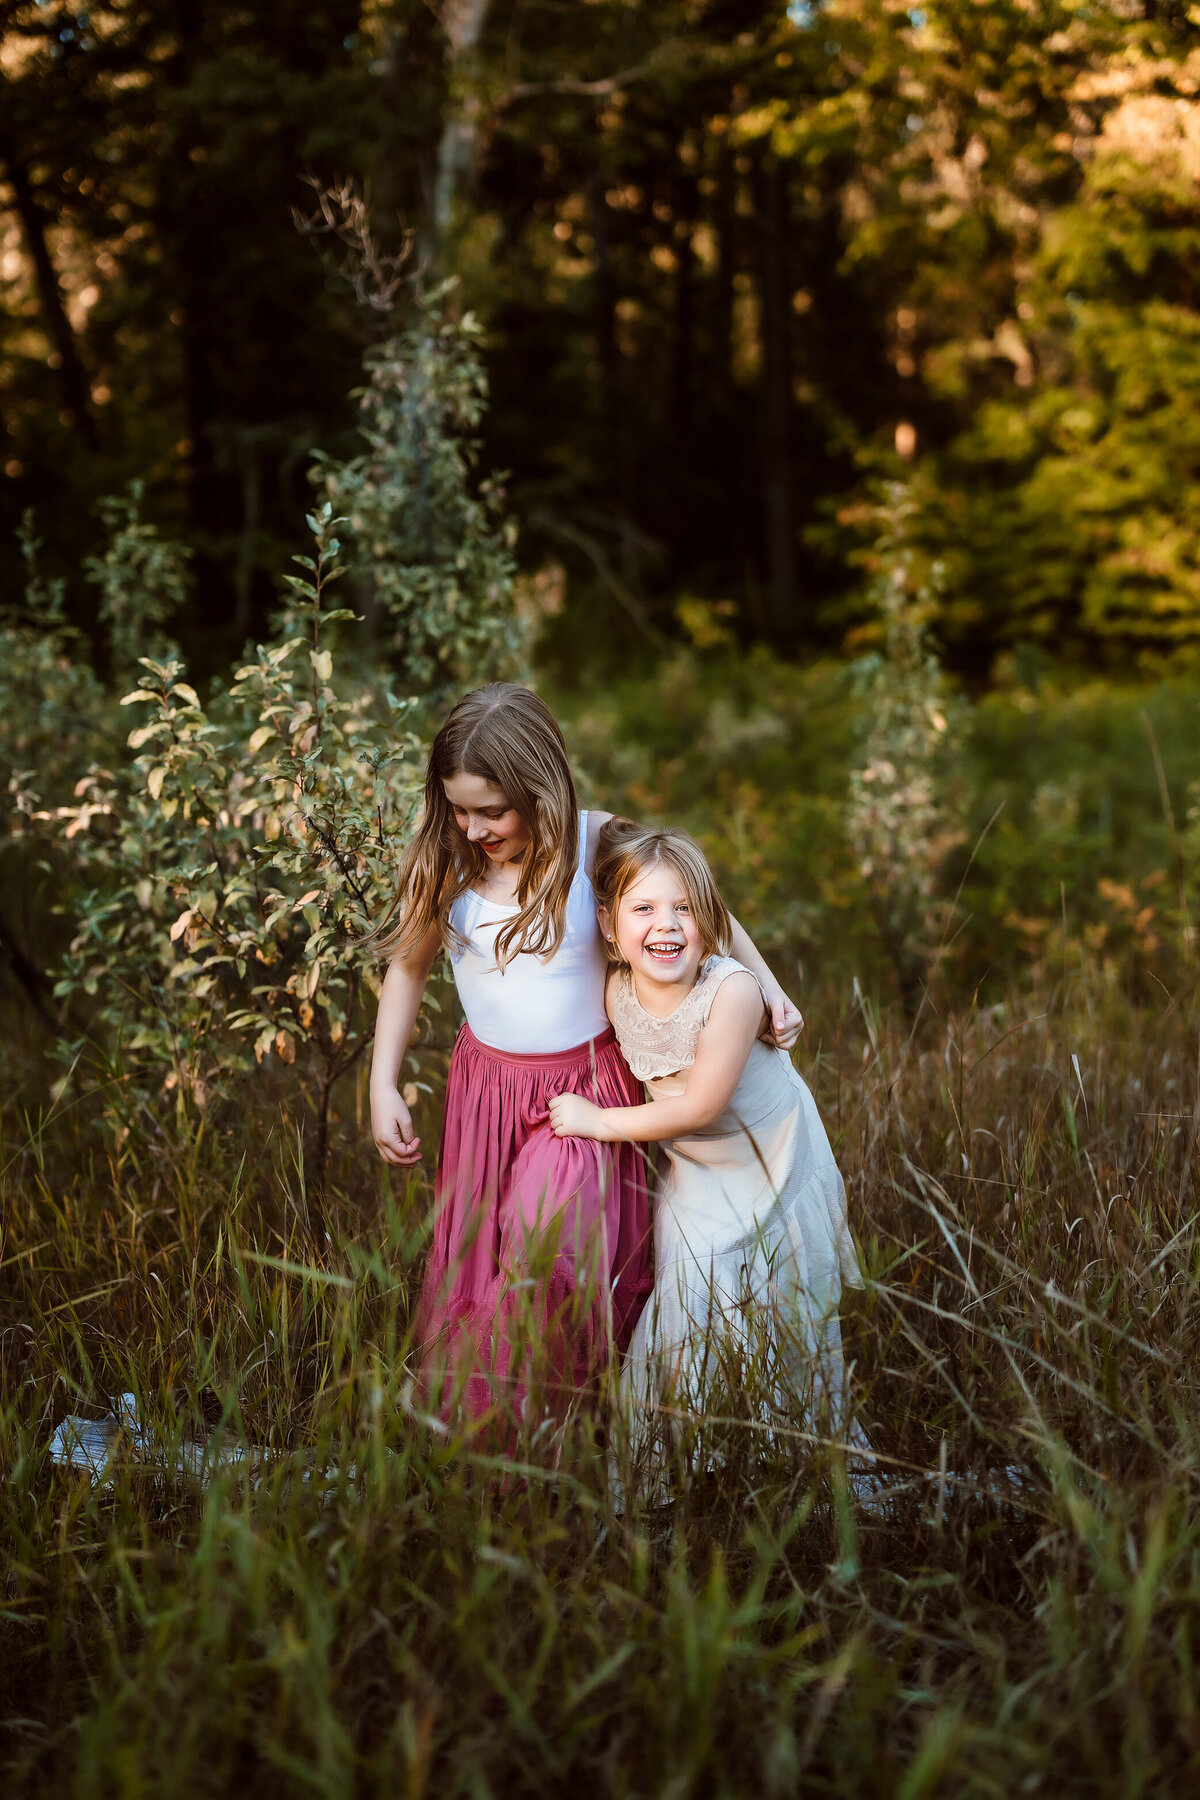 best+family+photographey+kalispell+mt+_+valerie+clement+photography+_+maternity+_+family+_+baby+_+child+_+photography+studio+_+outdoor+photo+session+whitefish+mt